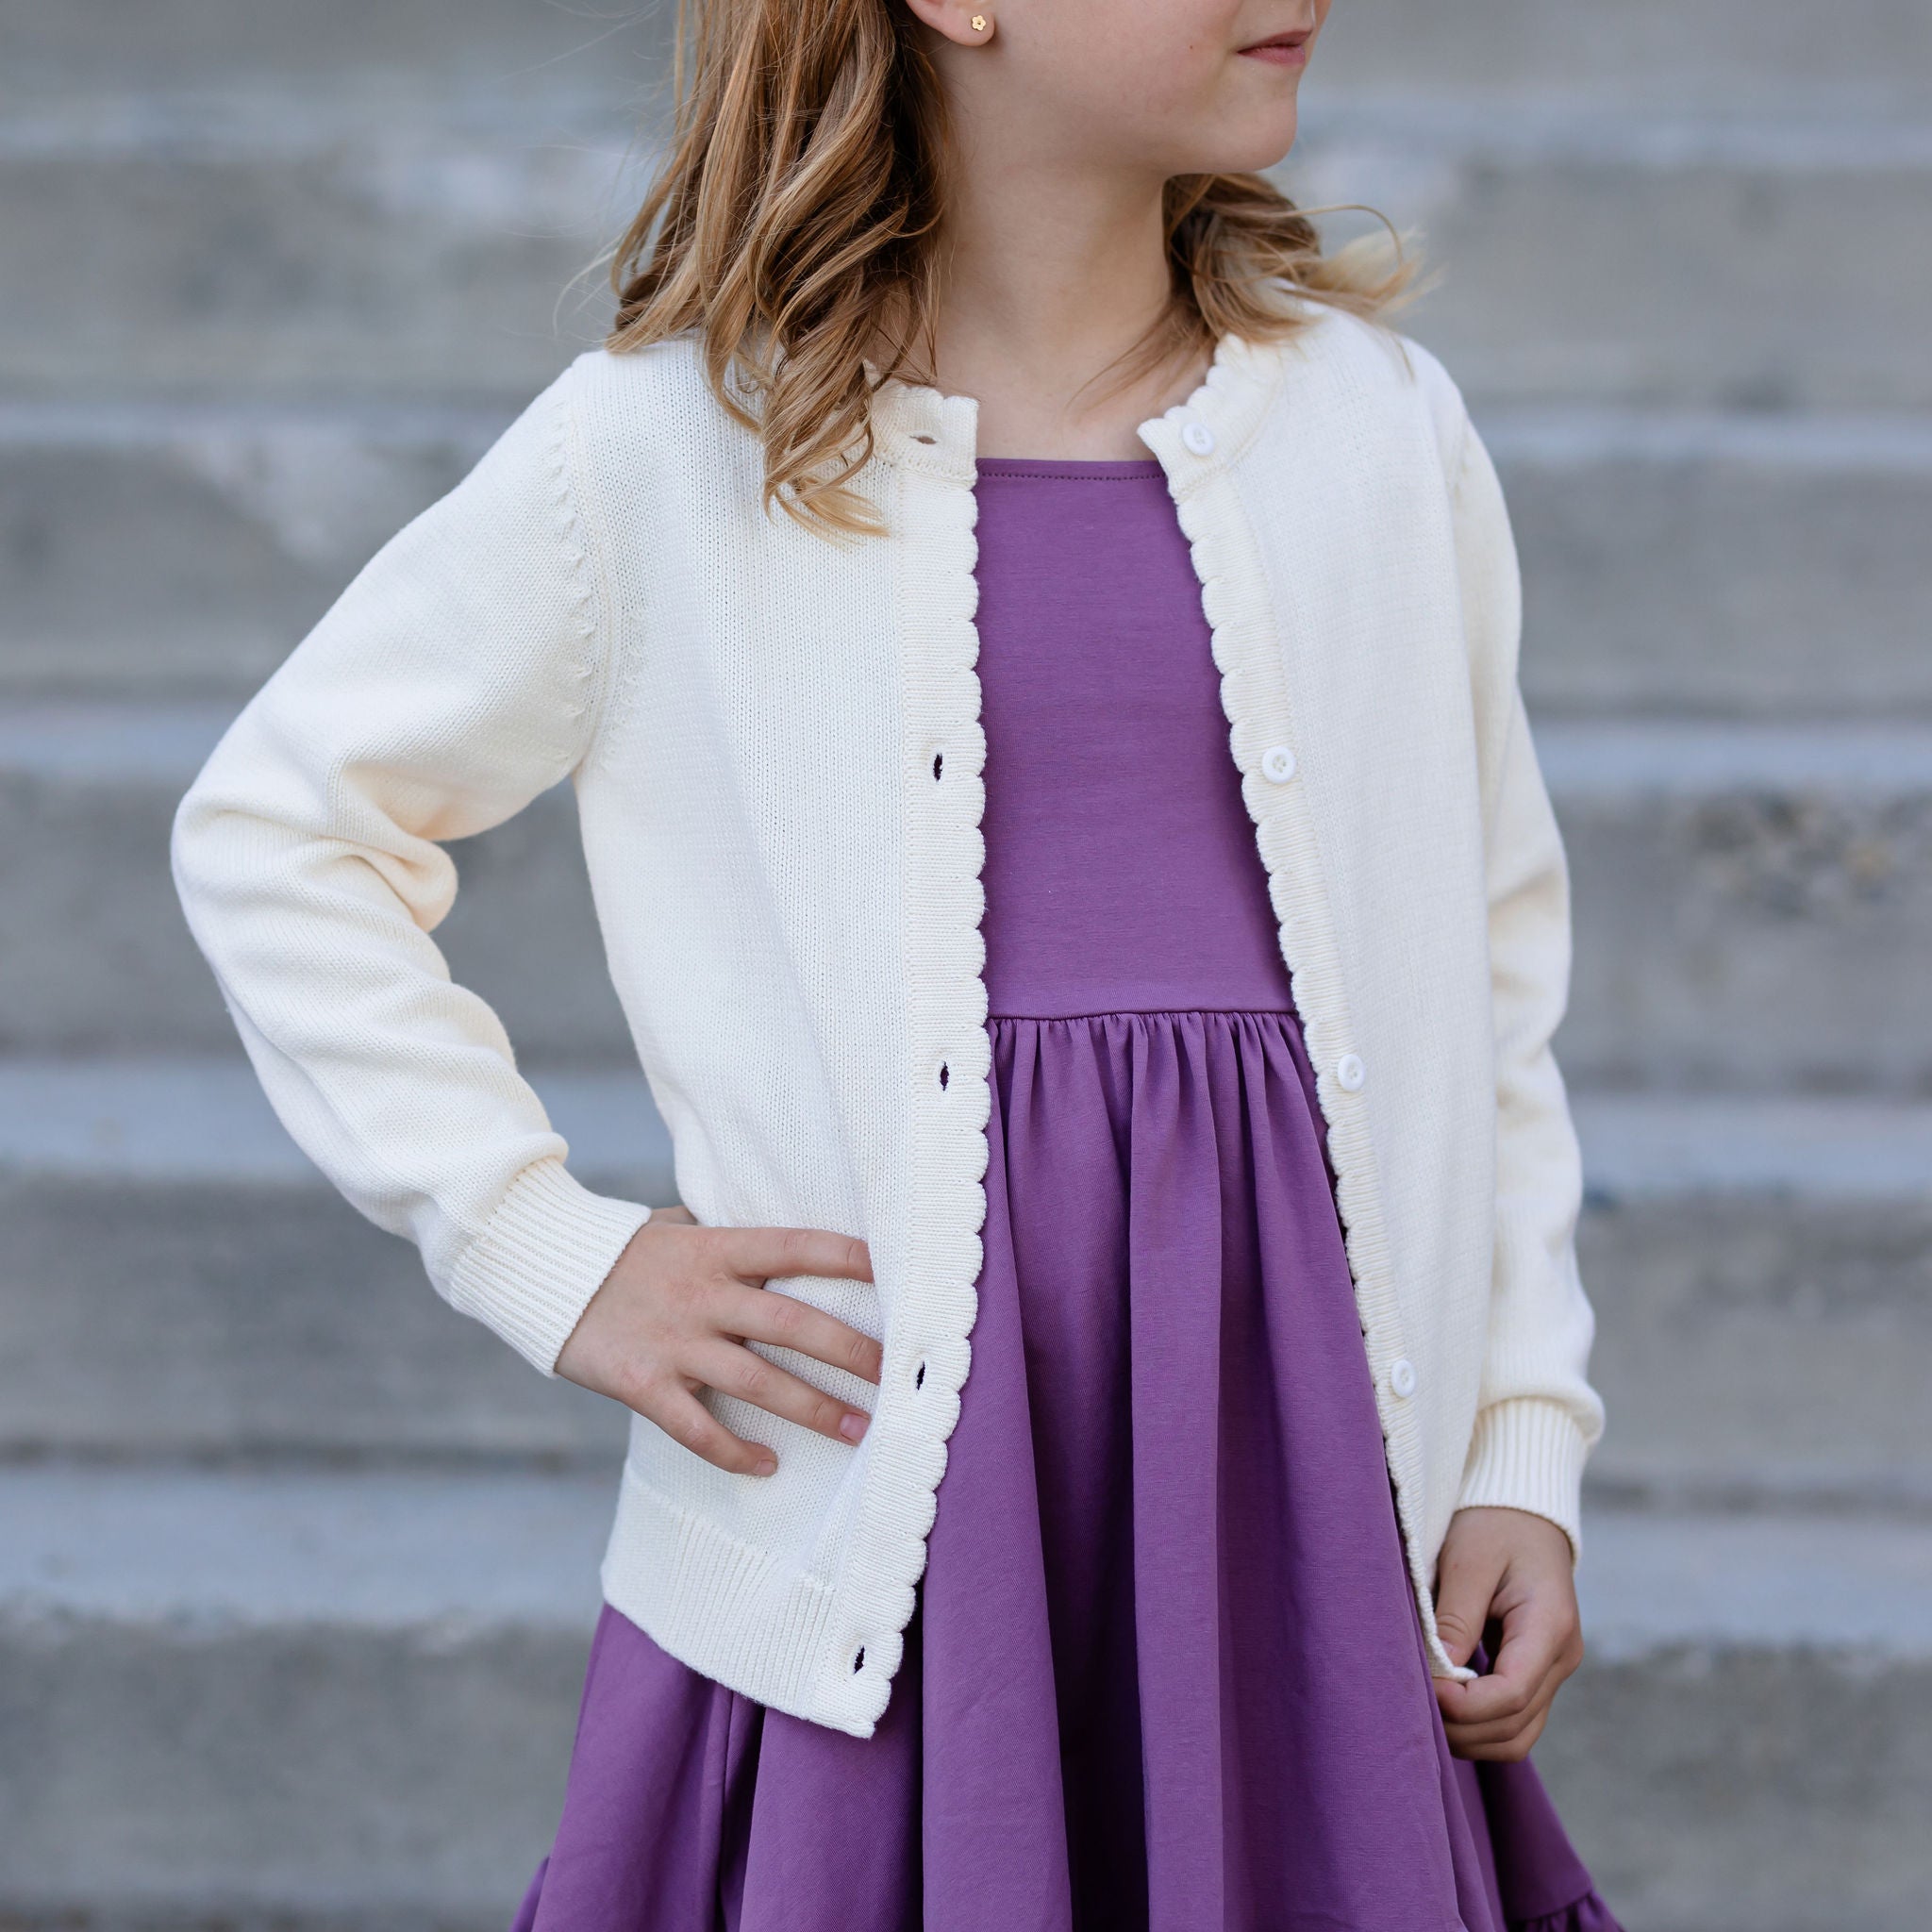 little girl with hand on hip wearing plum purple cotton dress with ivory cardigan sweater over it